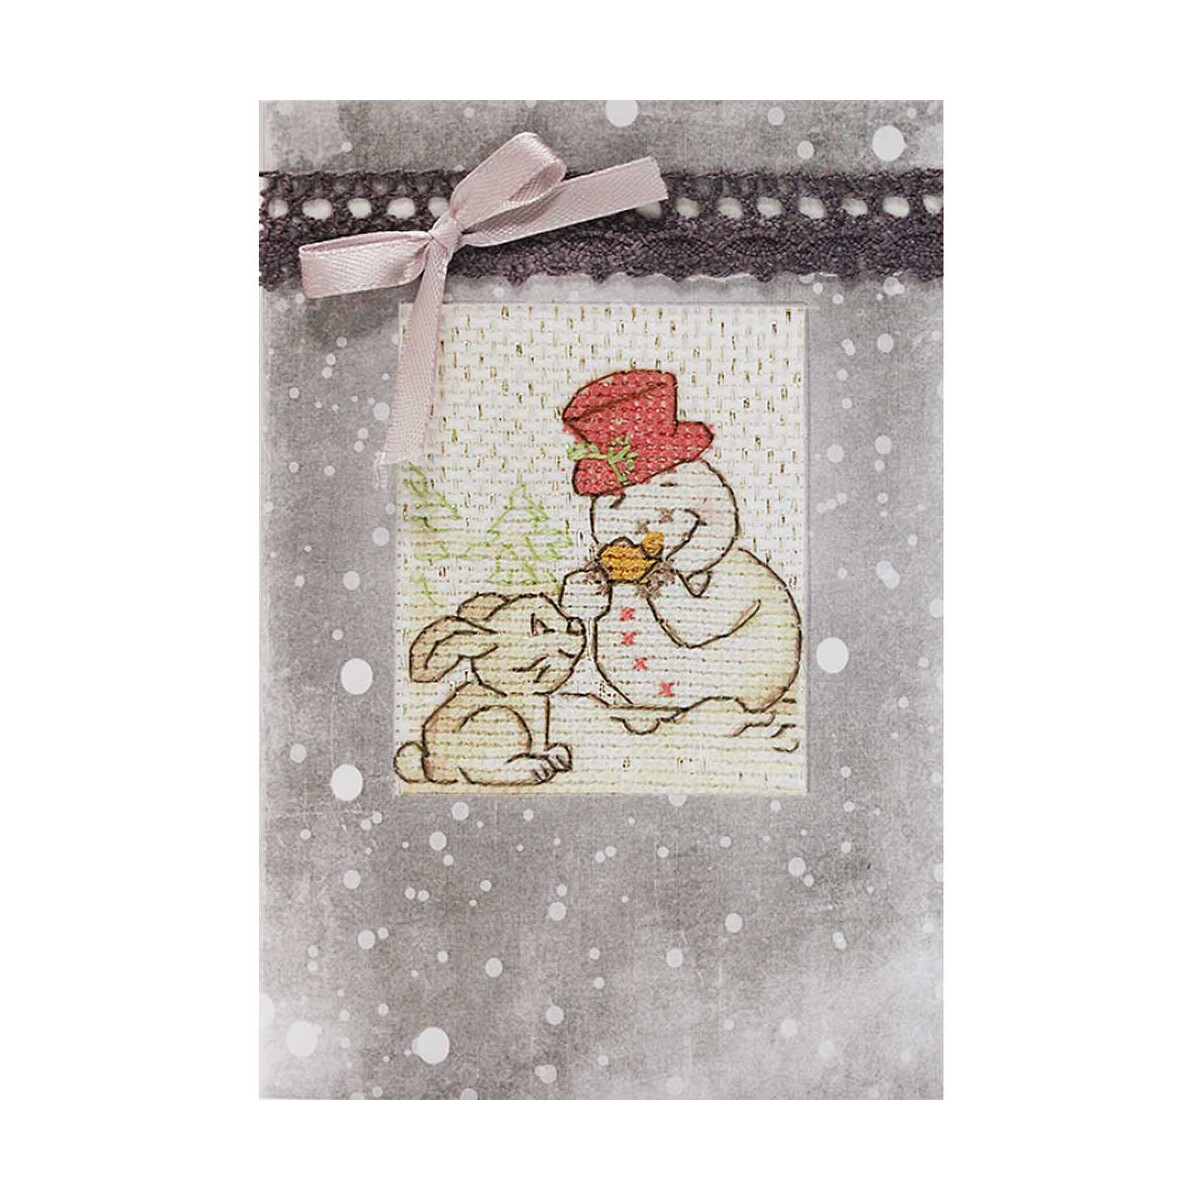 A festive card with an embroidered scene featuring a...